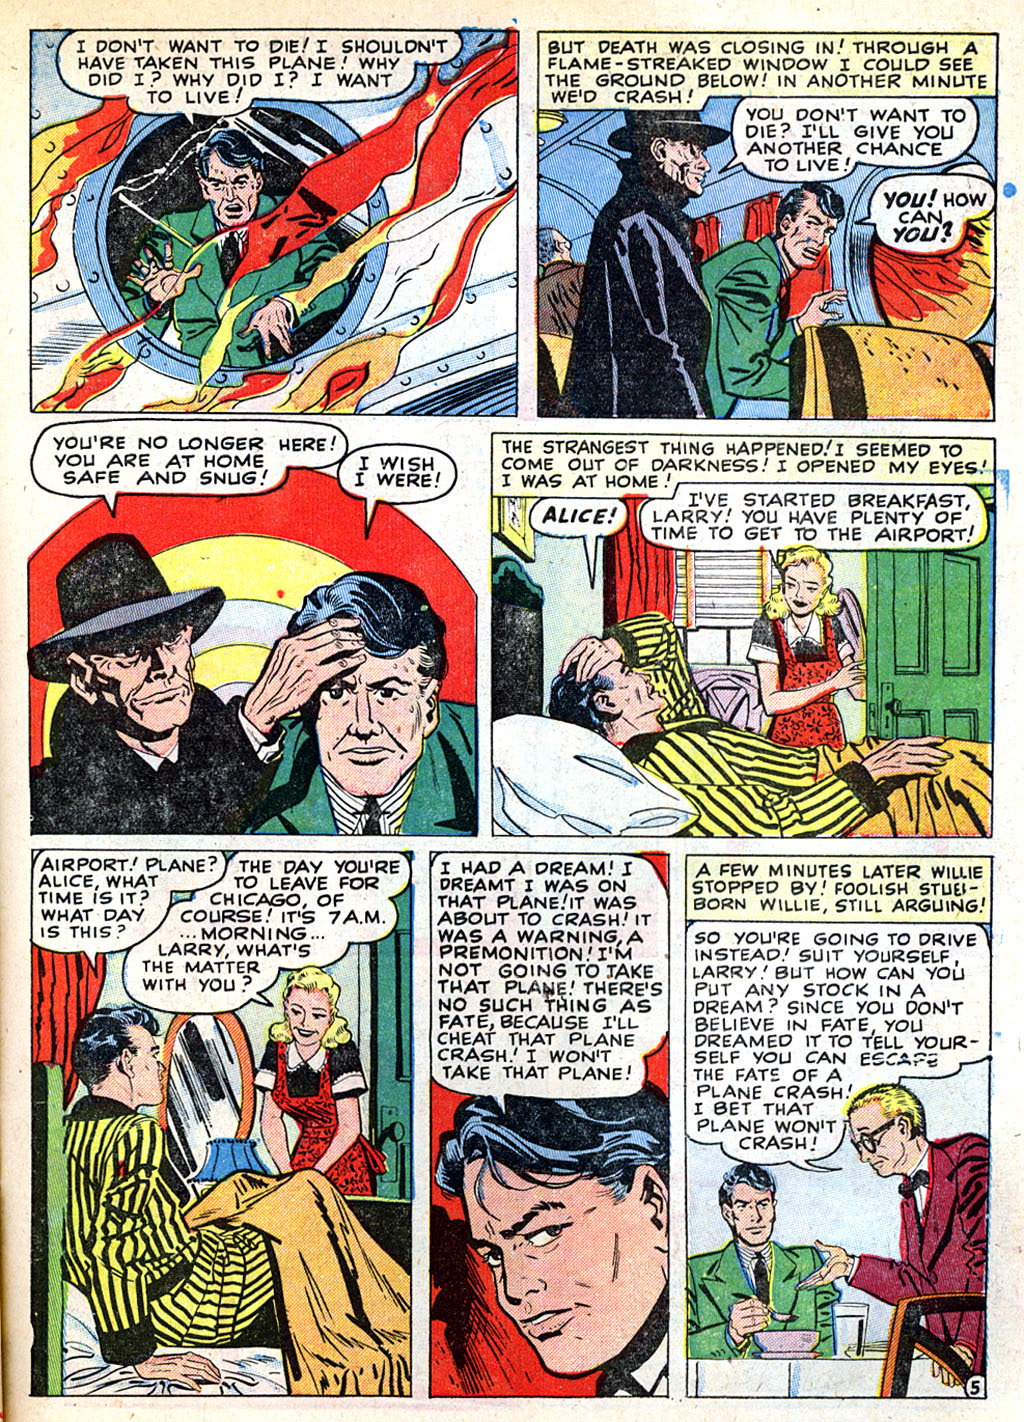 Marvel Tales (1949) 101 Page 6